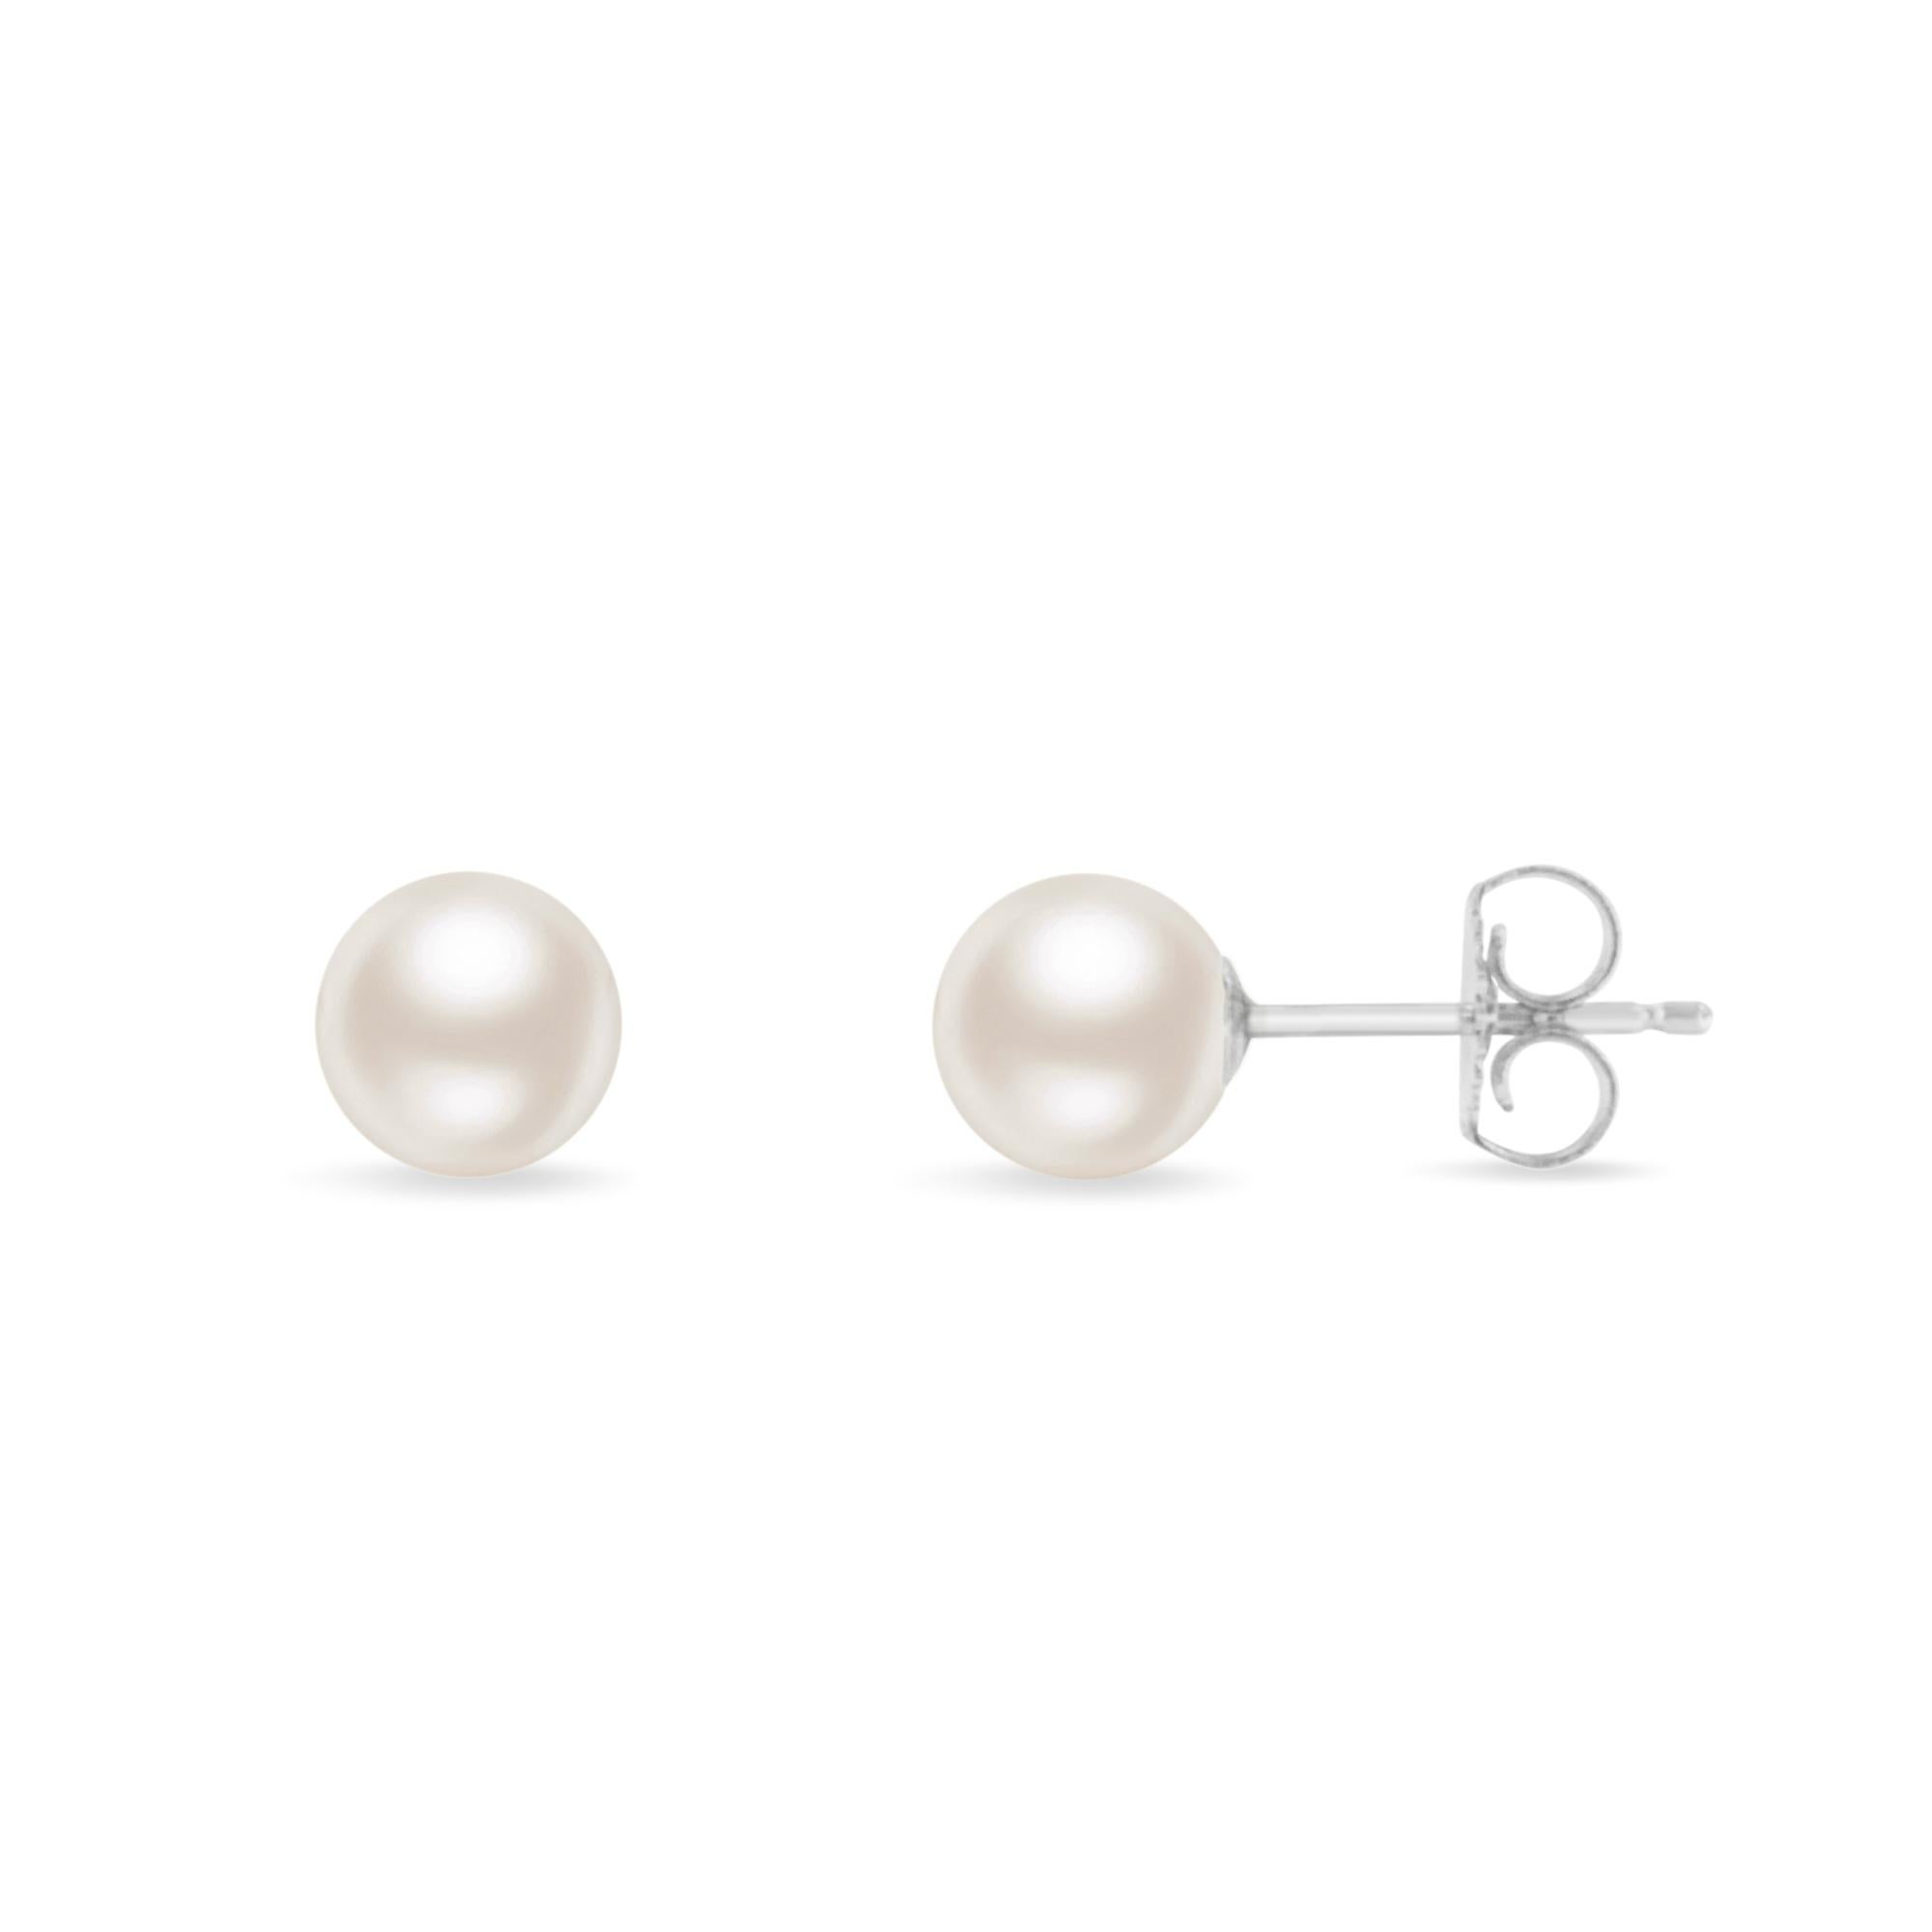 Pearls are a timeless classic, and these simple pearl stud earrings are the height of quality. These high luster Akoya cultured pearls are white with pink overtones and are perfectly round. Each pearl is set in a cup setting crafted of real 14 karat